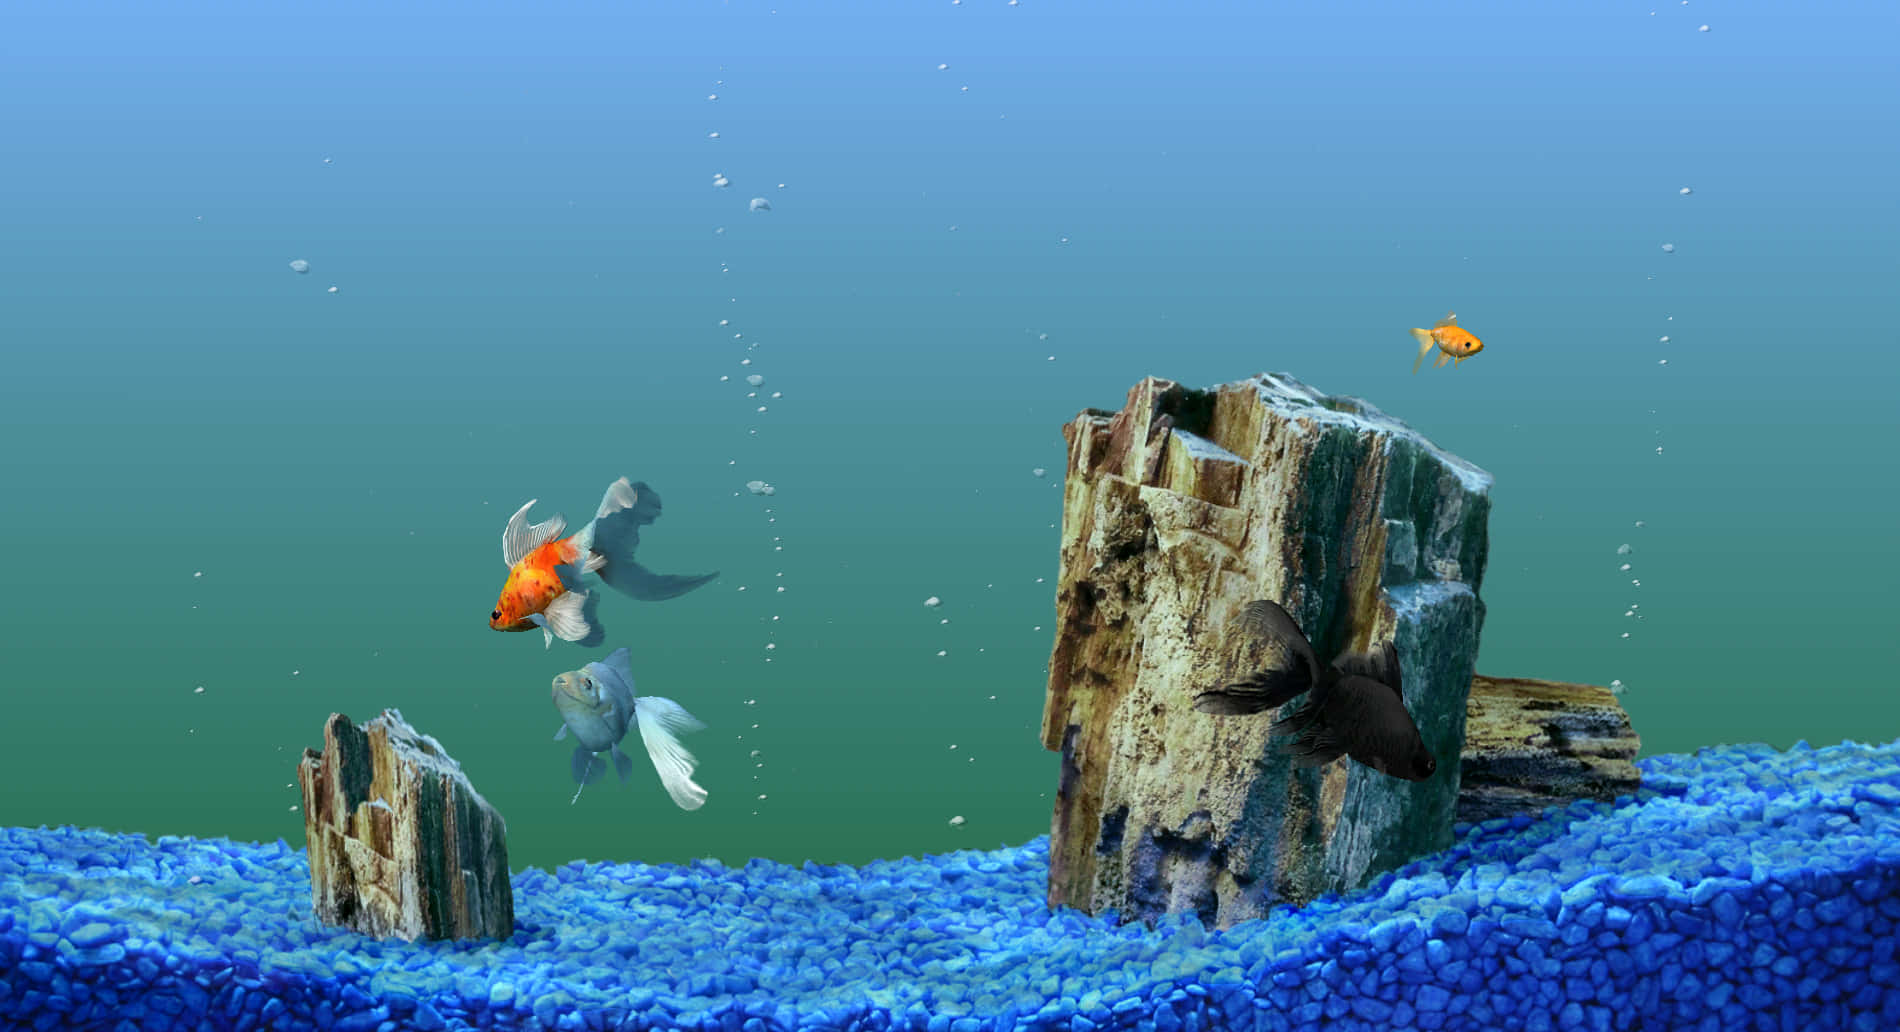 Experience the beauty of underwater life in your own home with an Aquarium Fish Tank Wallpaper